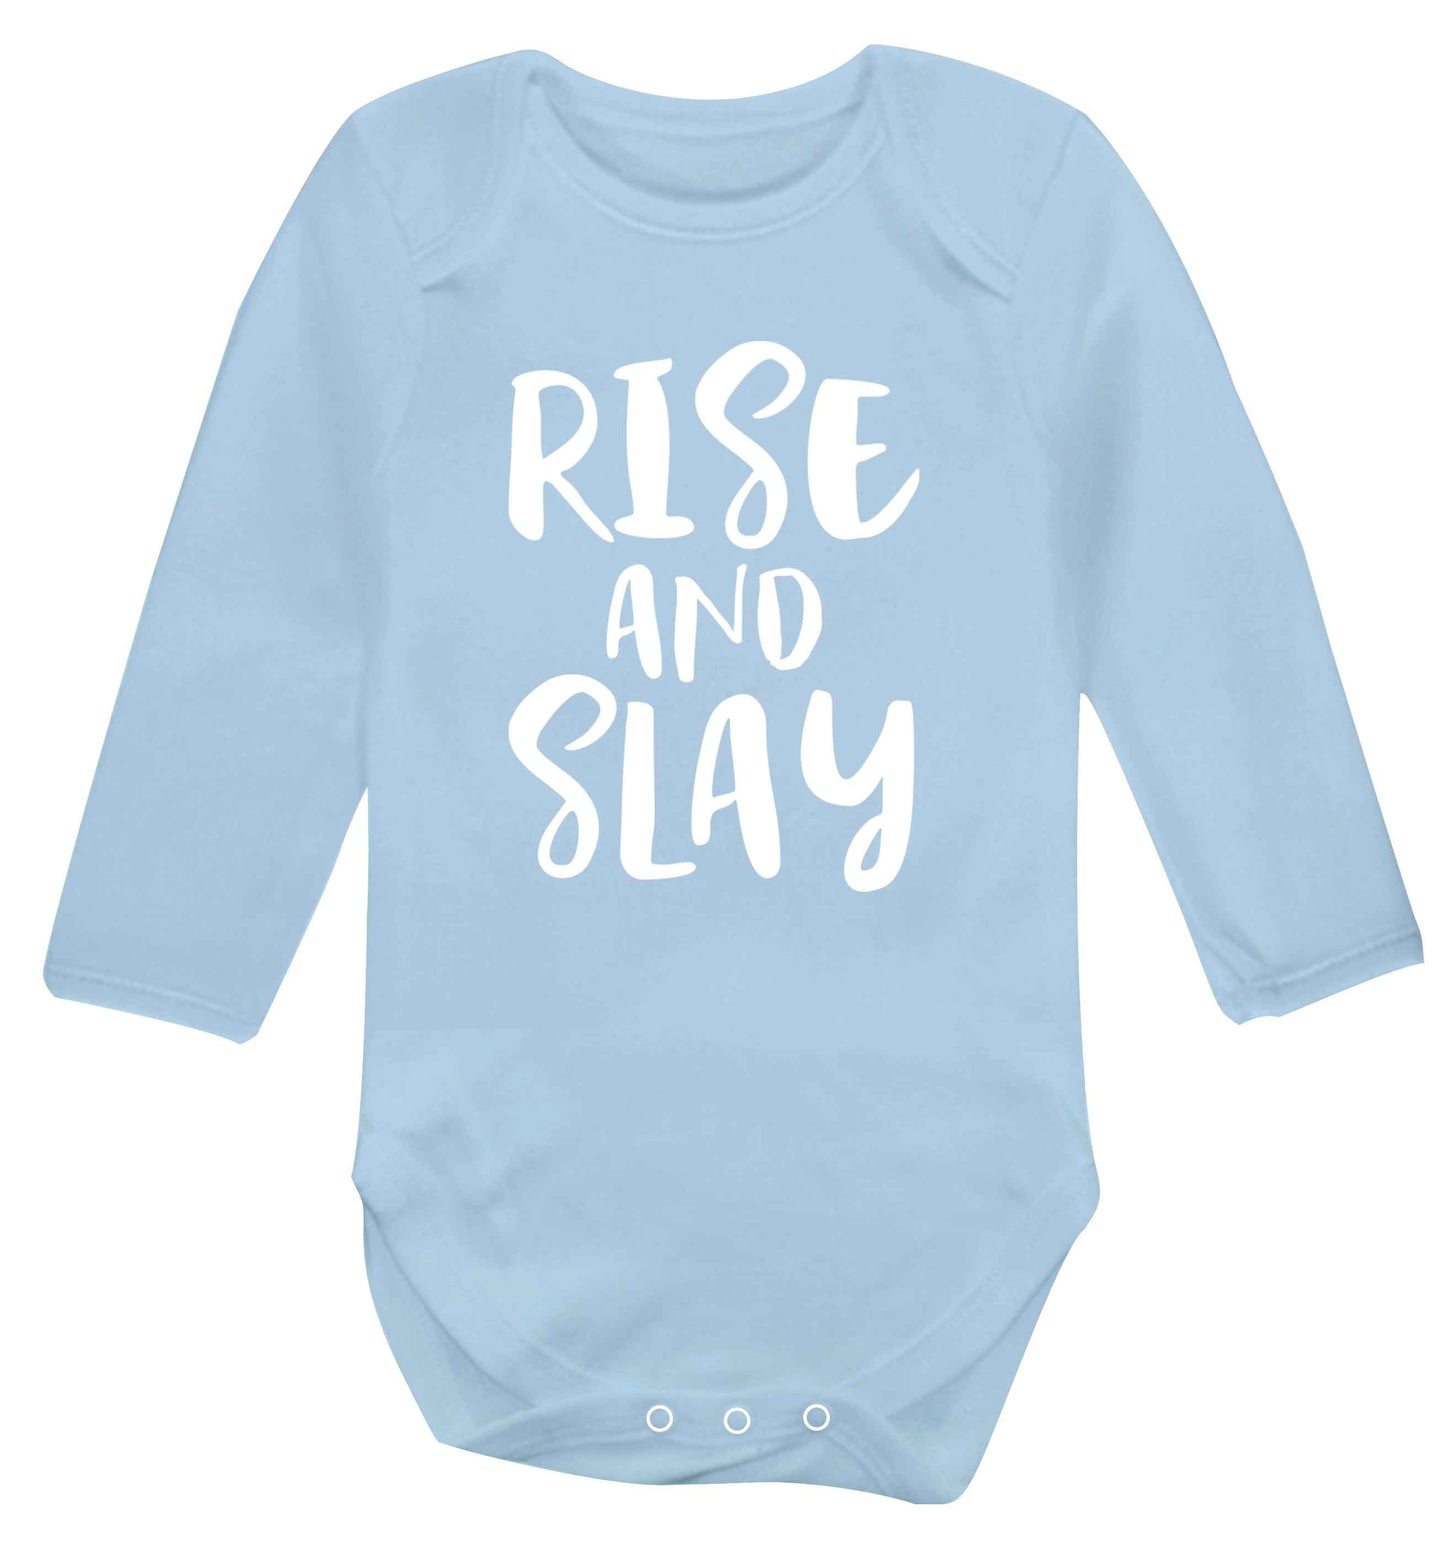 Rise and slay Baby Vest long sleeved pale blue 6-12 months